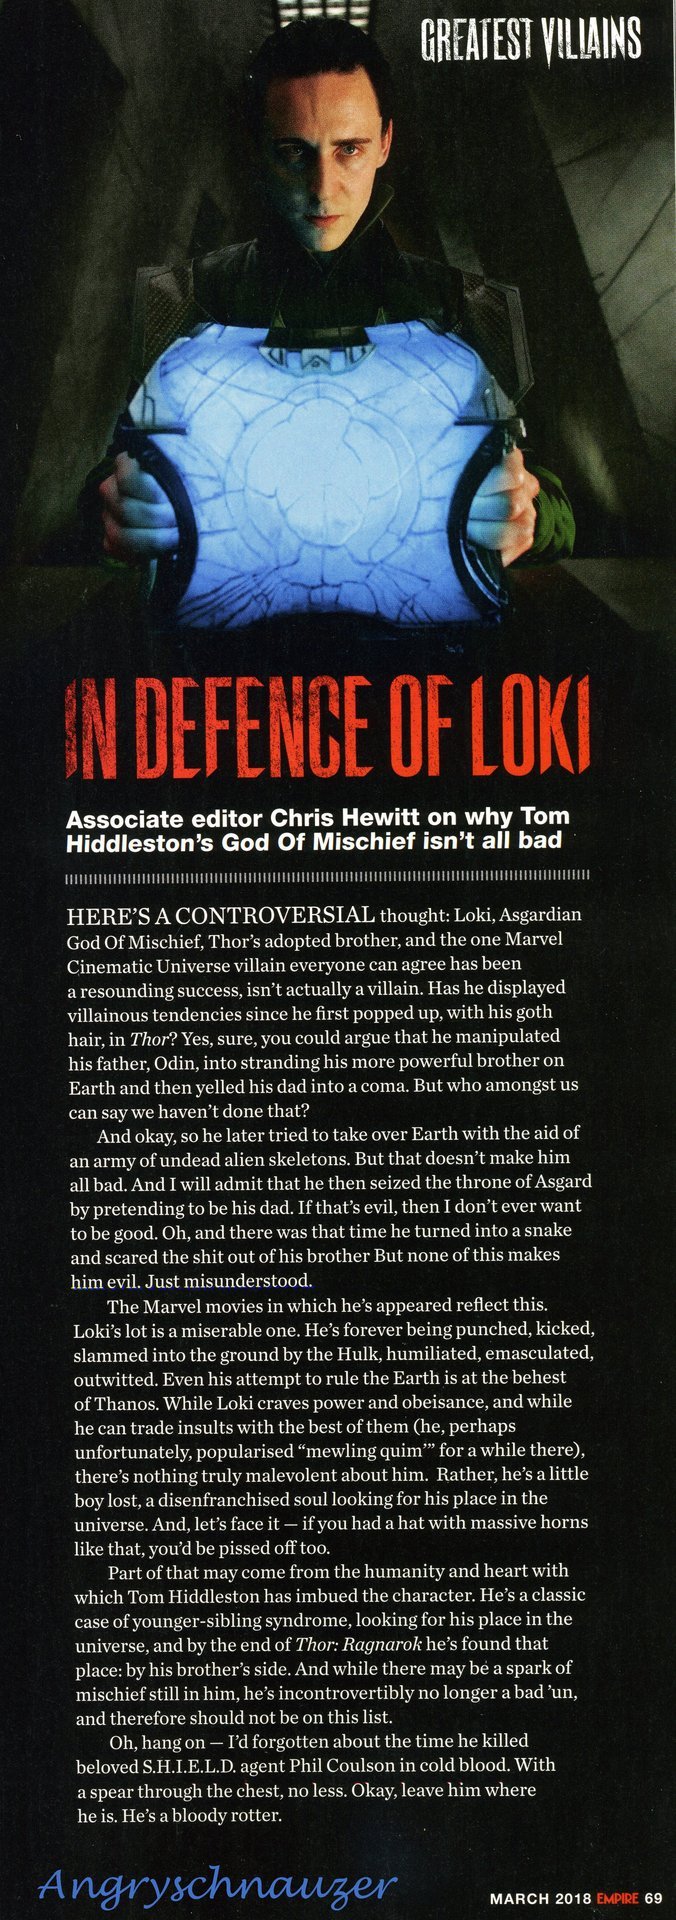 Empire Magazine’s Top 20 Villains of All Time. #3 Loki.
March 2018